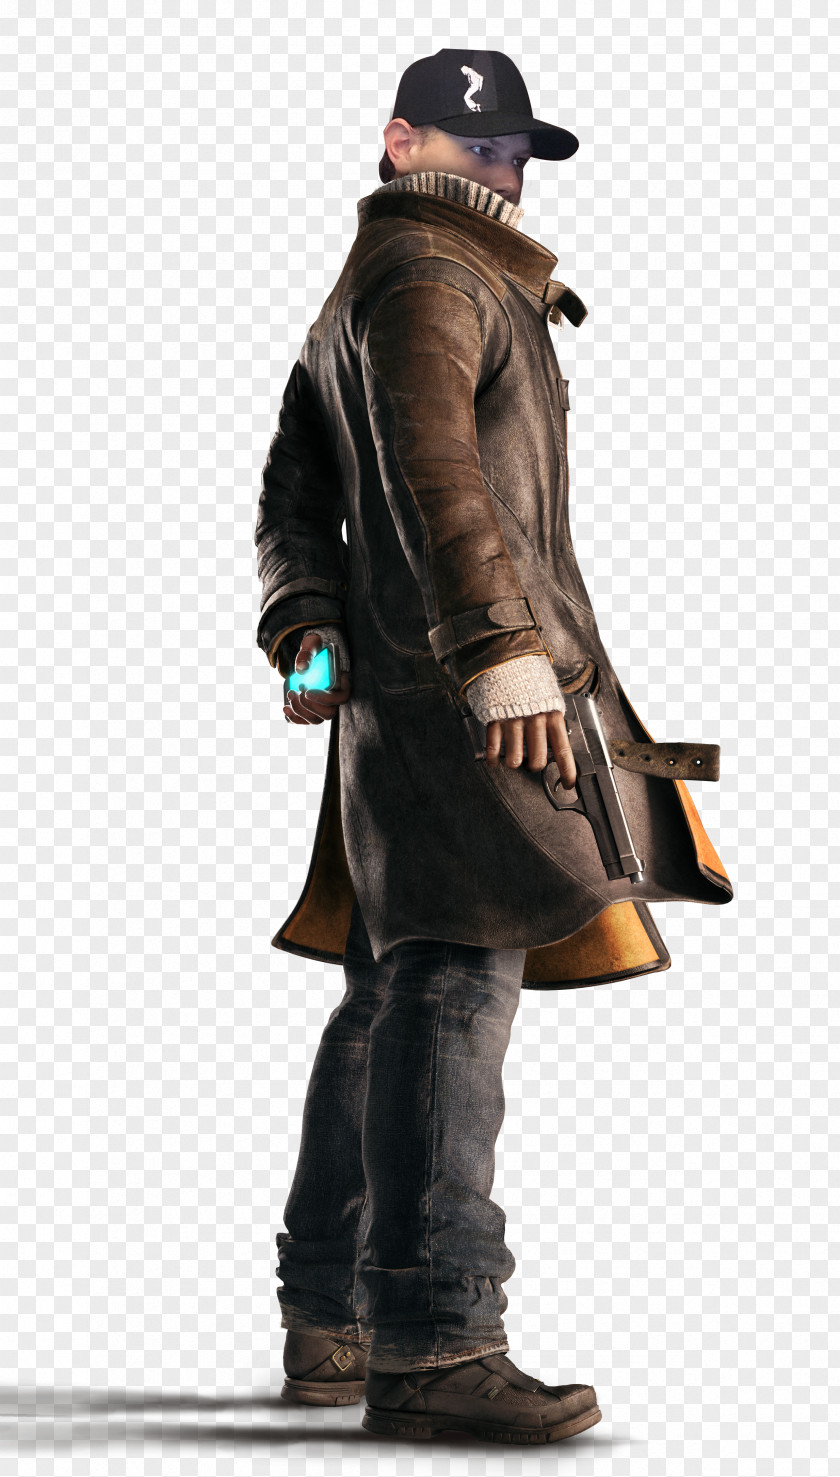 Watch Dogs 2 Aiden Pearce Security Hacker Cosplay PNG